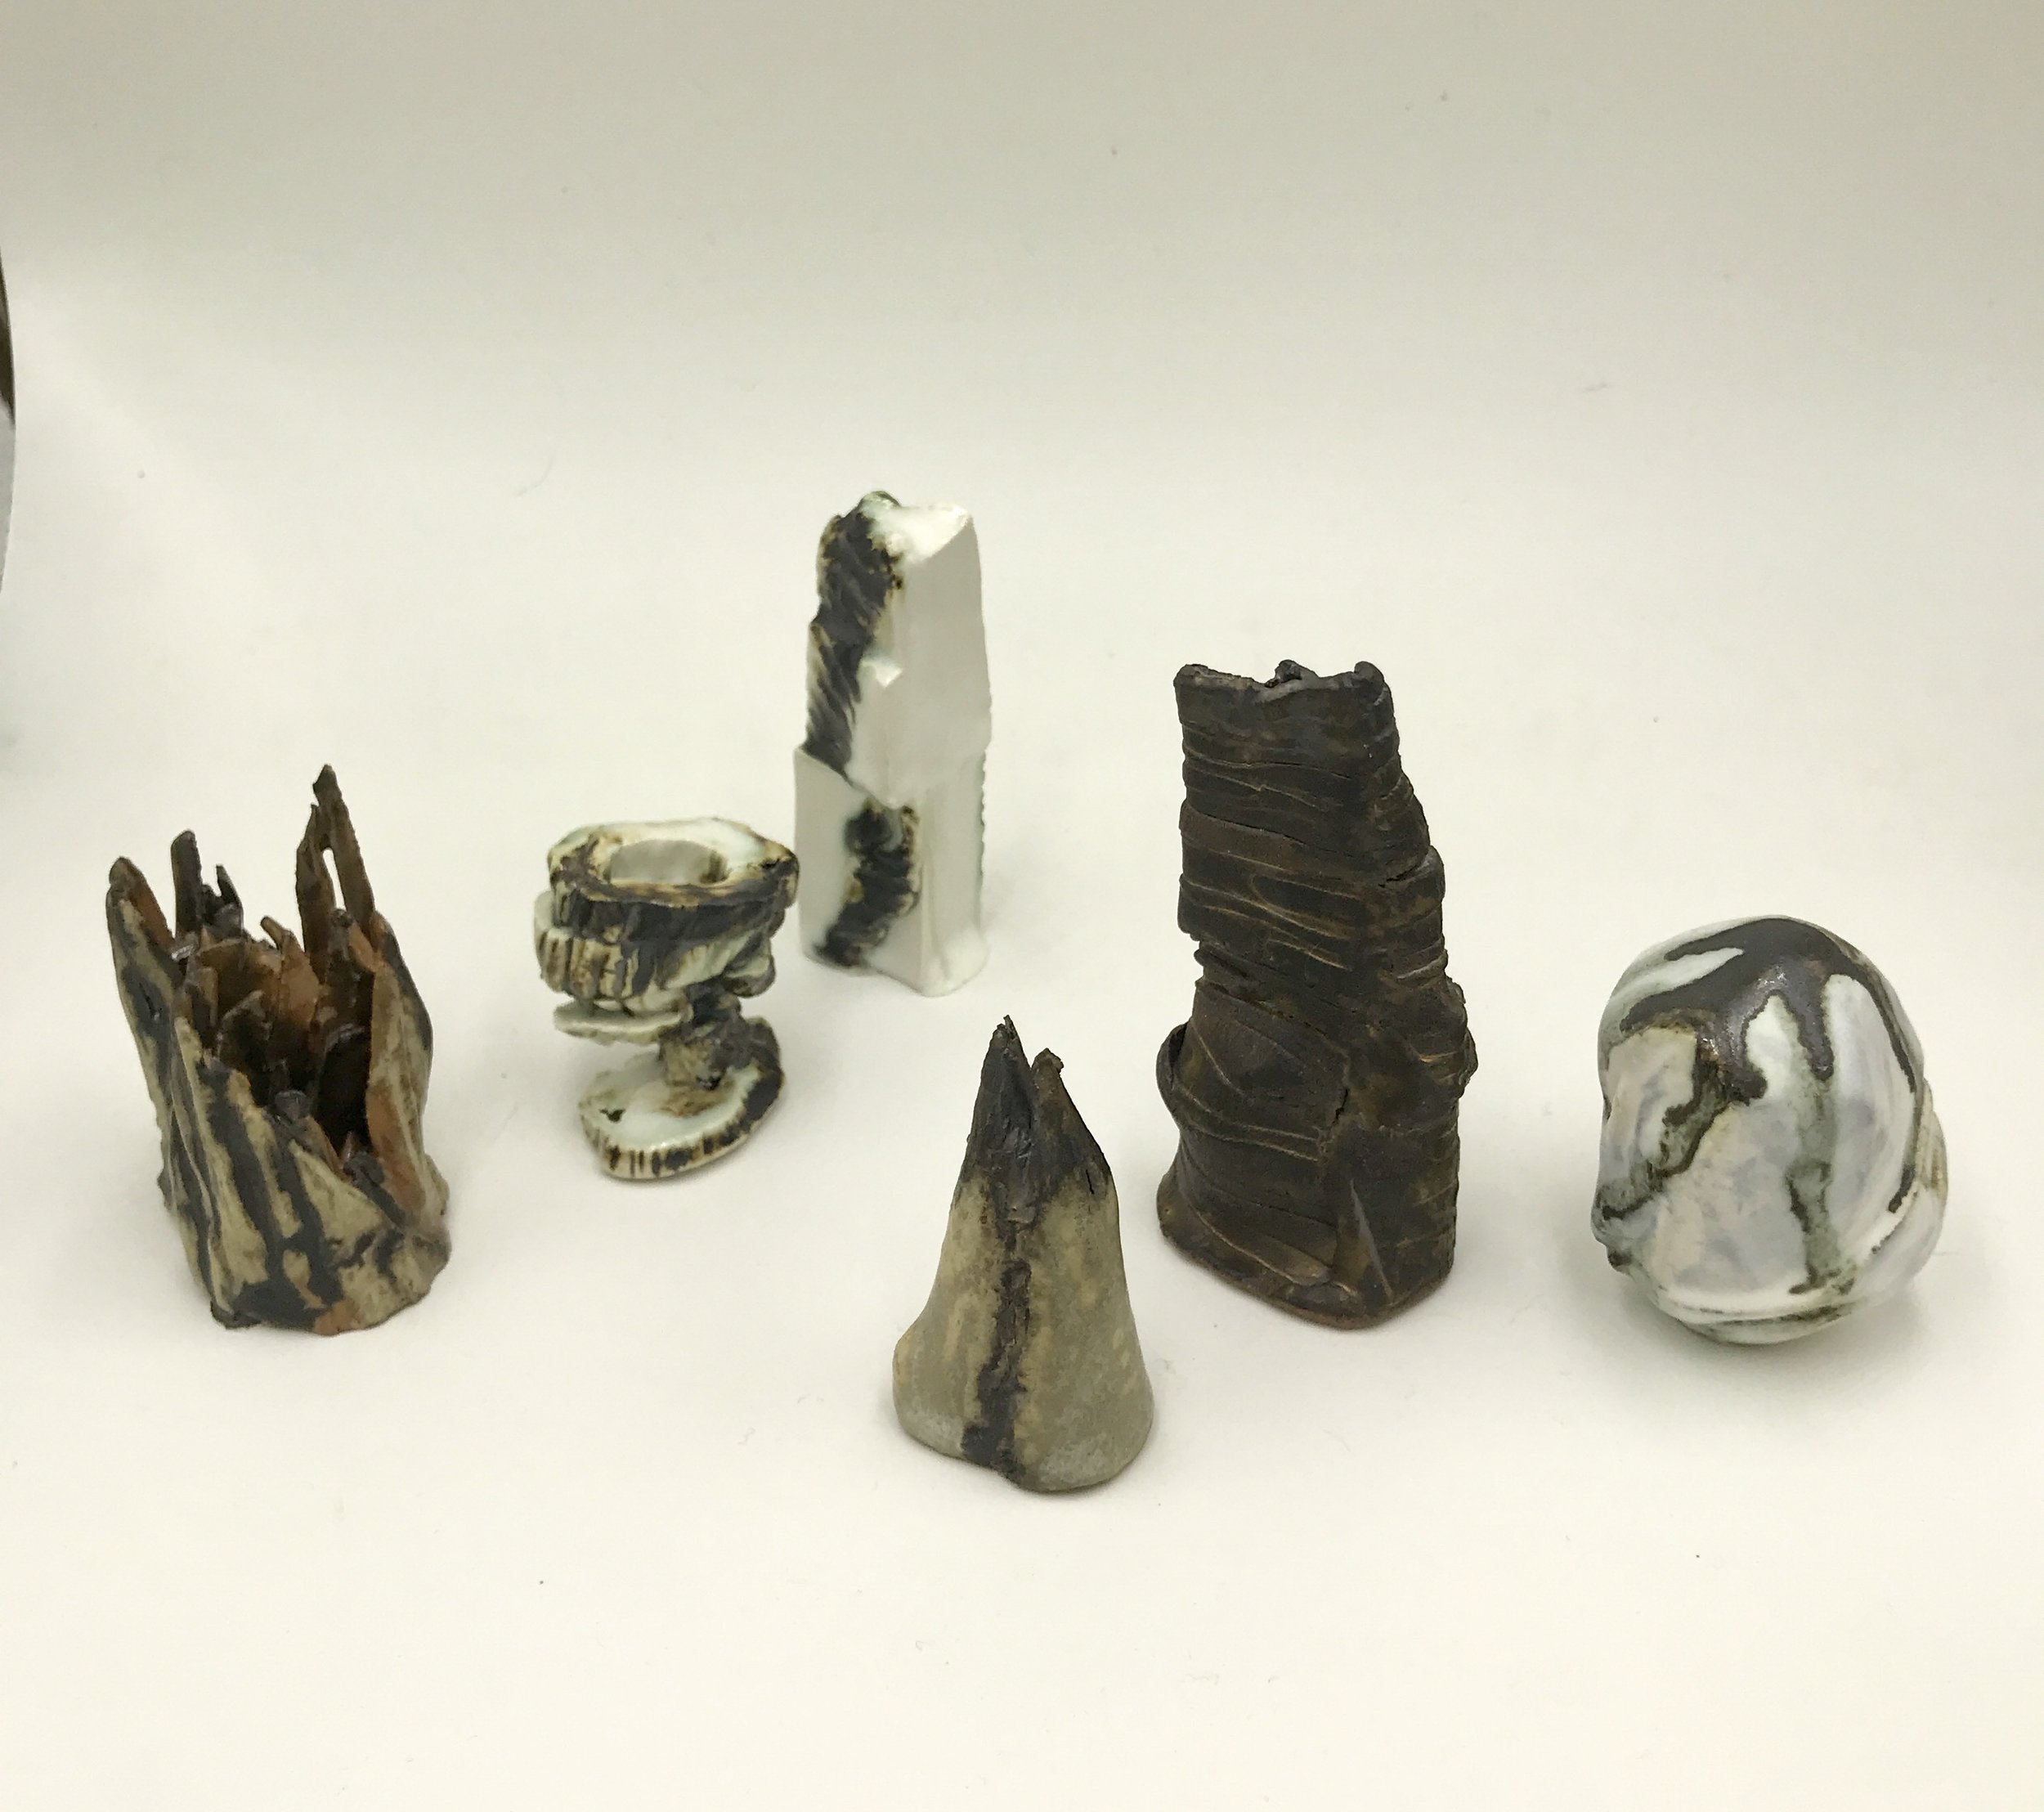  Hilda Shen,  Range of Mountains,  2014-2019. Glazed clay, a group of six, each around 2.75 x 2 x 2.25 inches, ©Hilda Shen, courtesy of Fou Gallery 